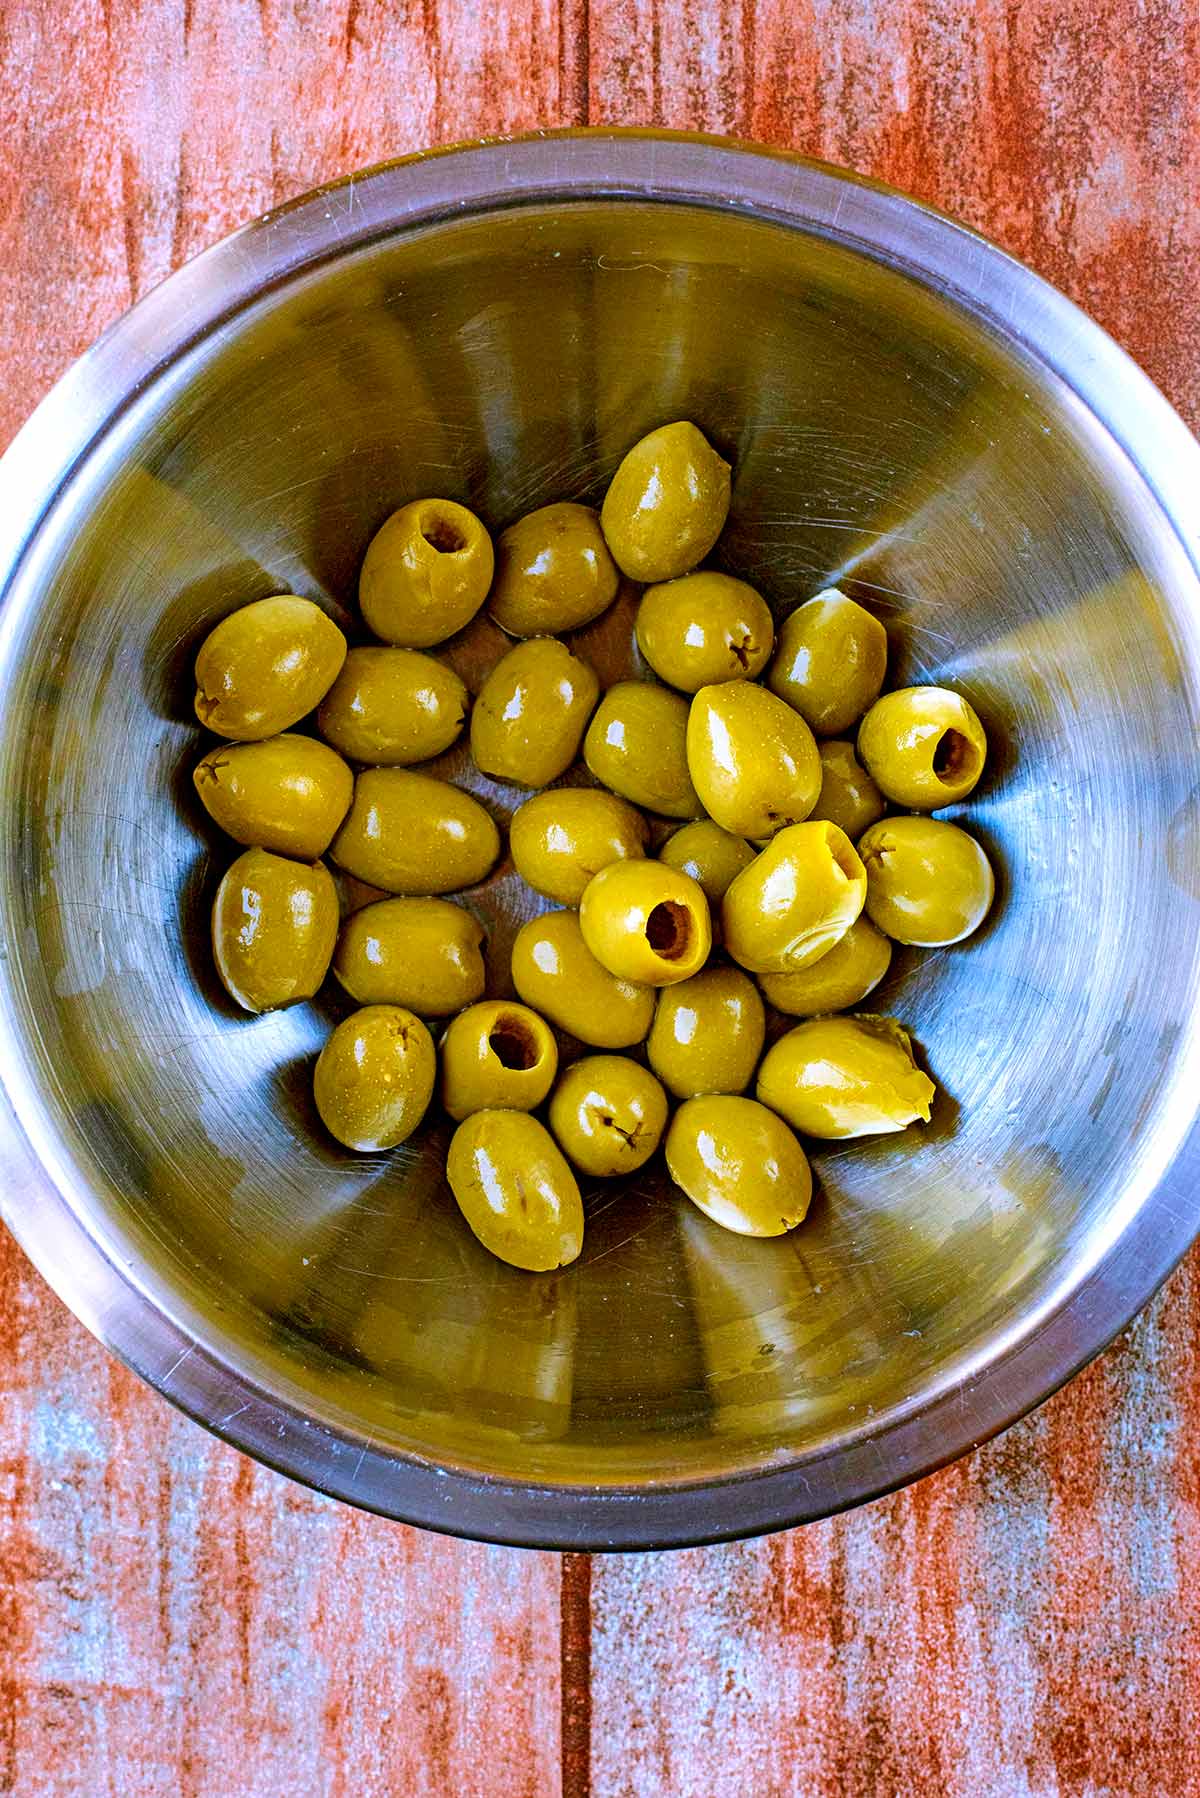 A large metal bowl containing about 30 green olives.